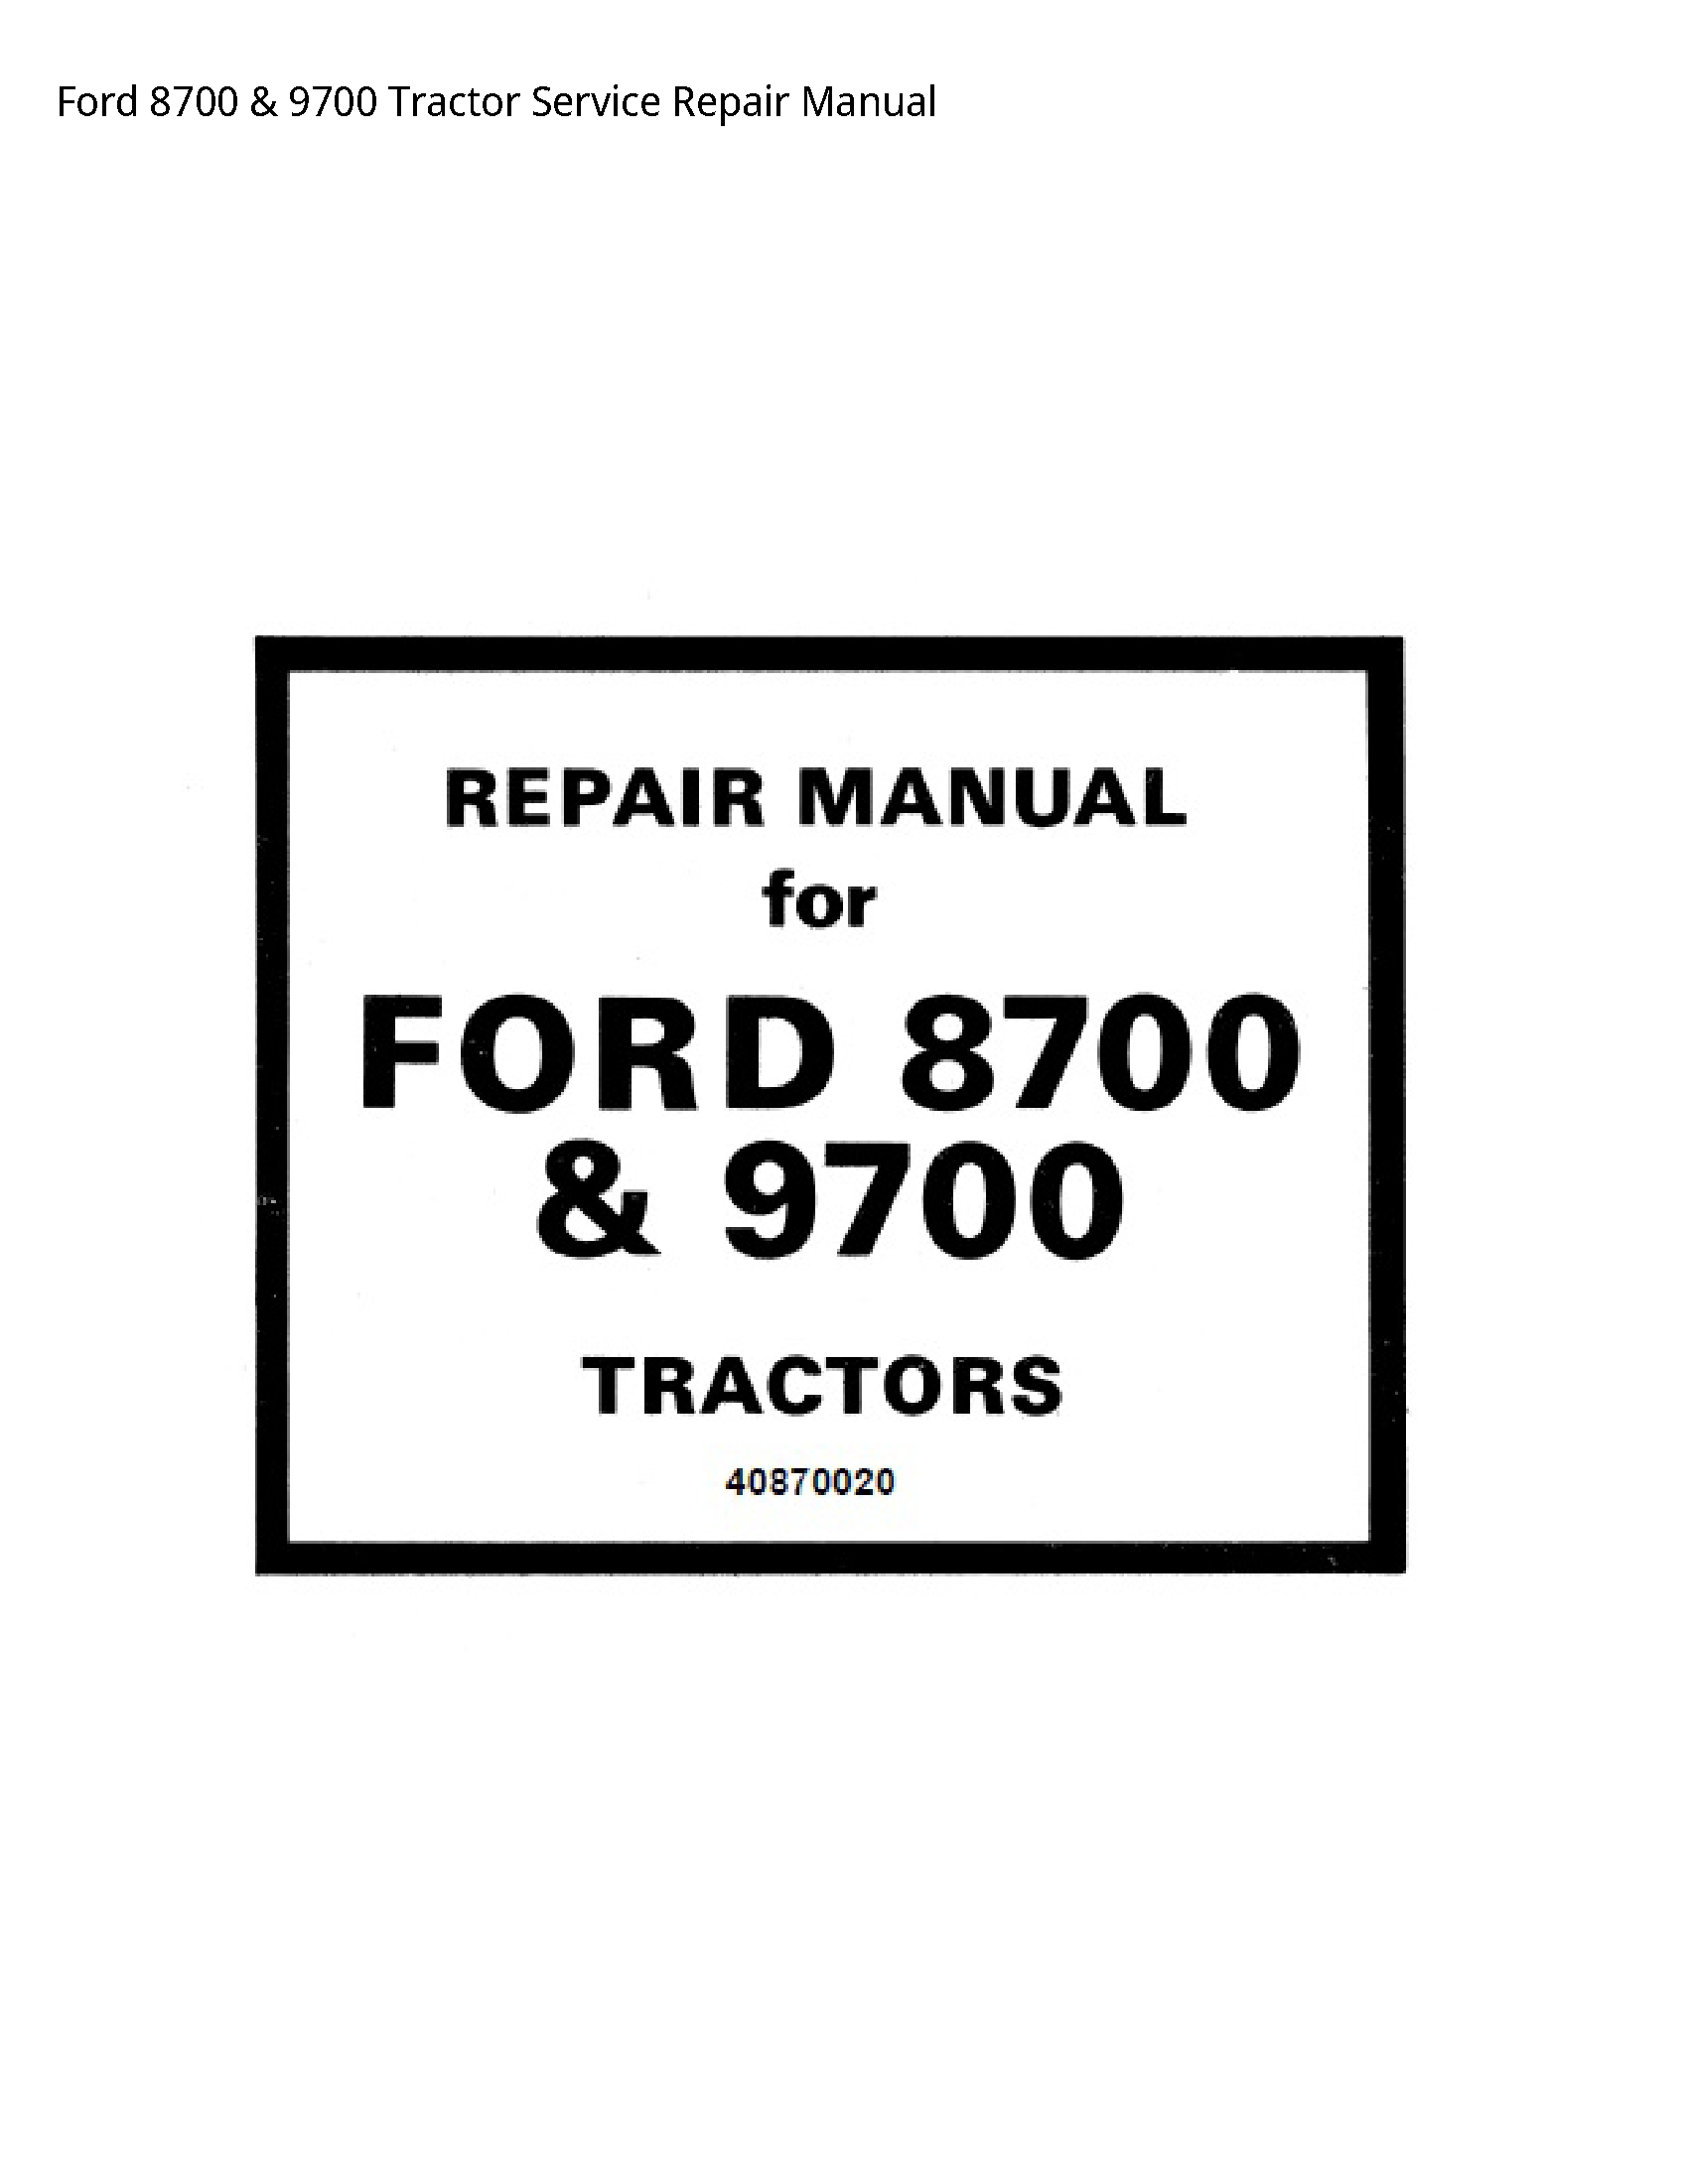 Ford 8700 Tractor manual